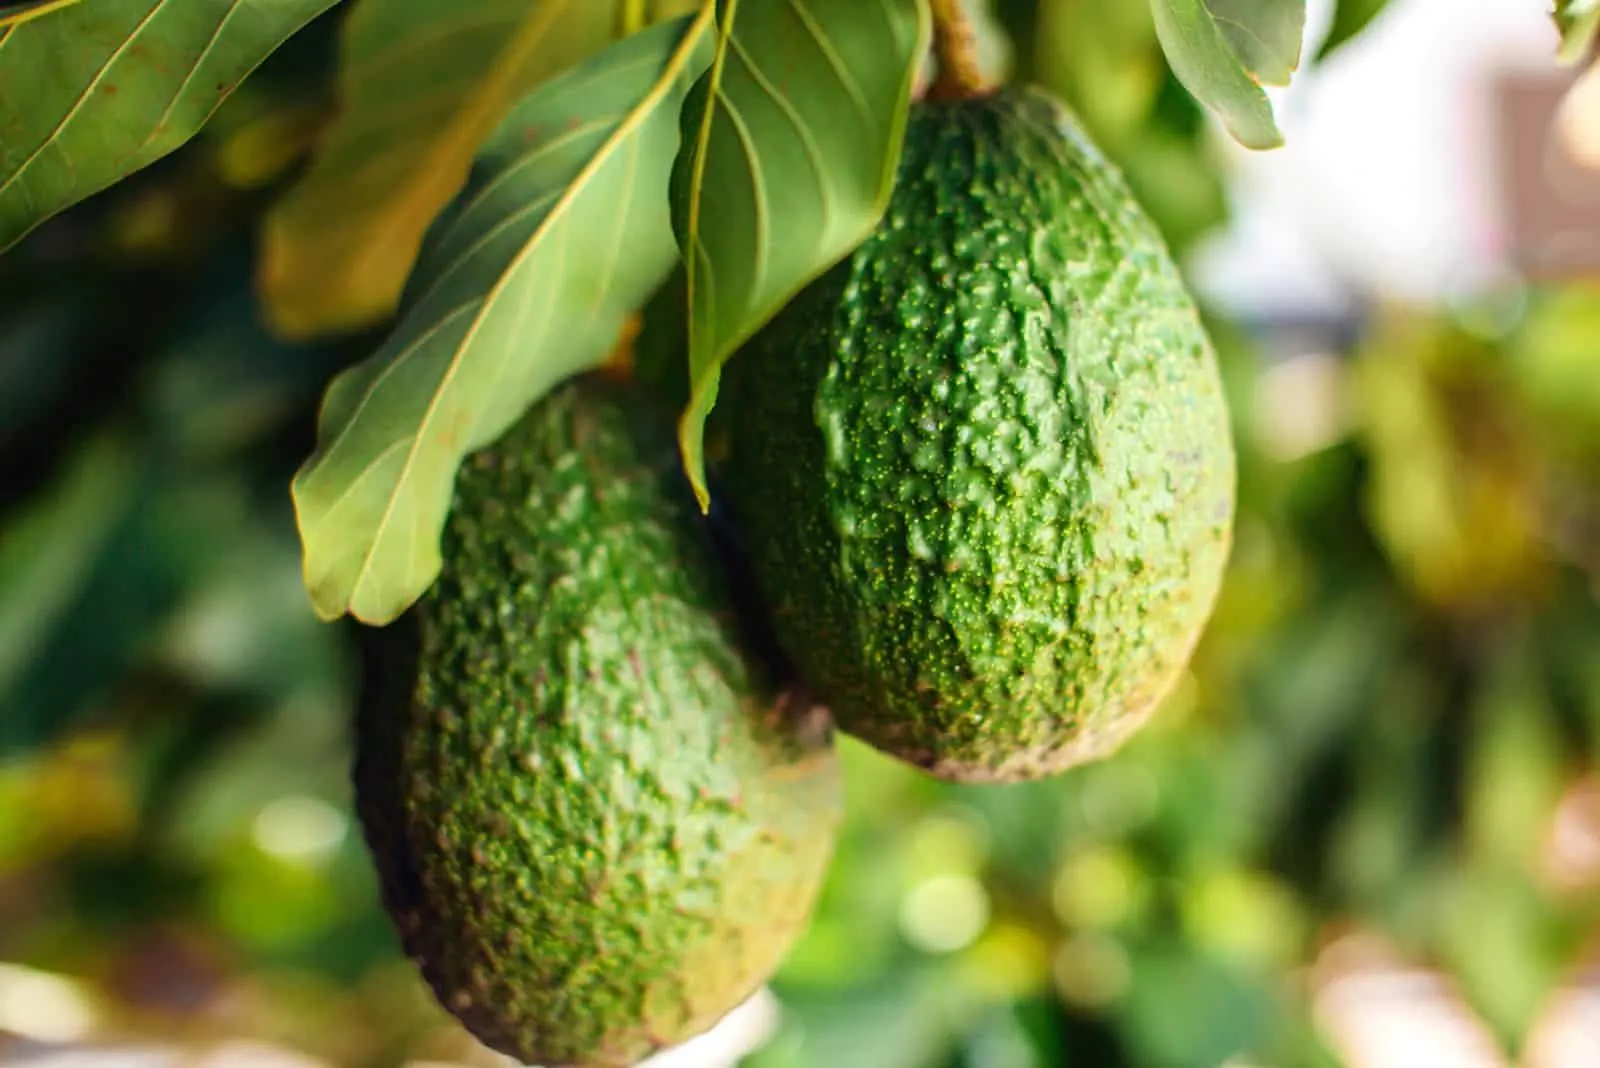 Green fruits of avocado on the tree with leafs.